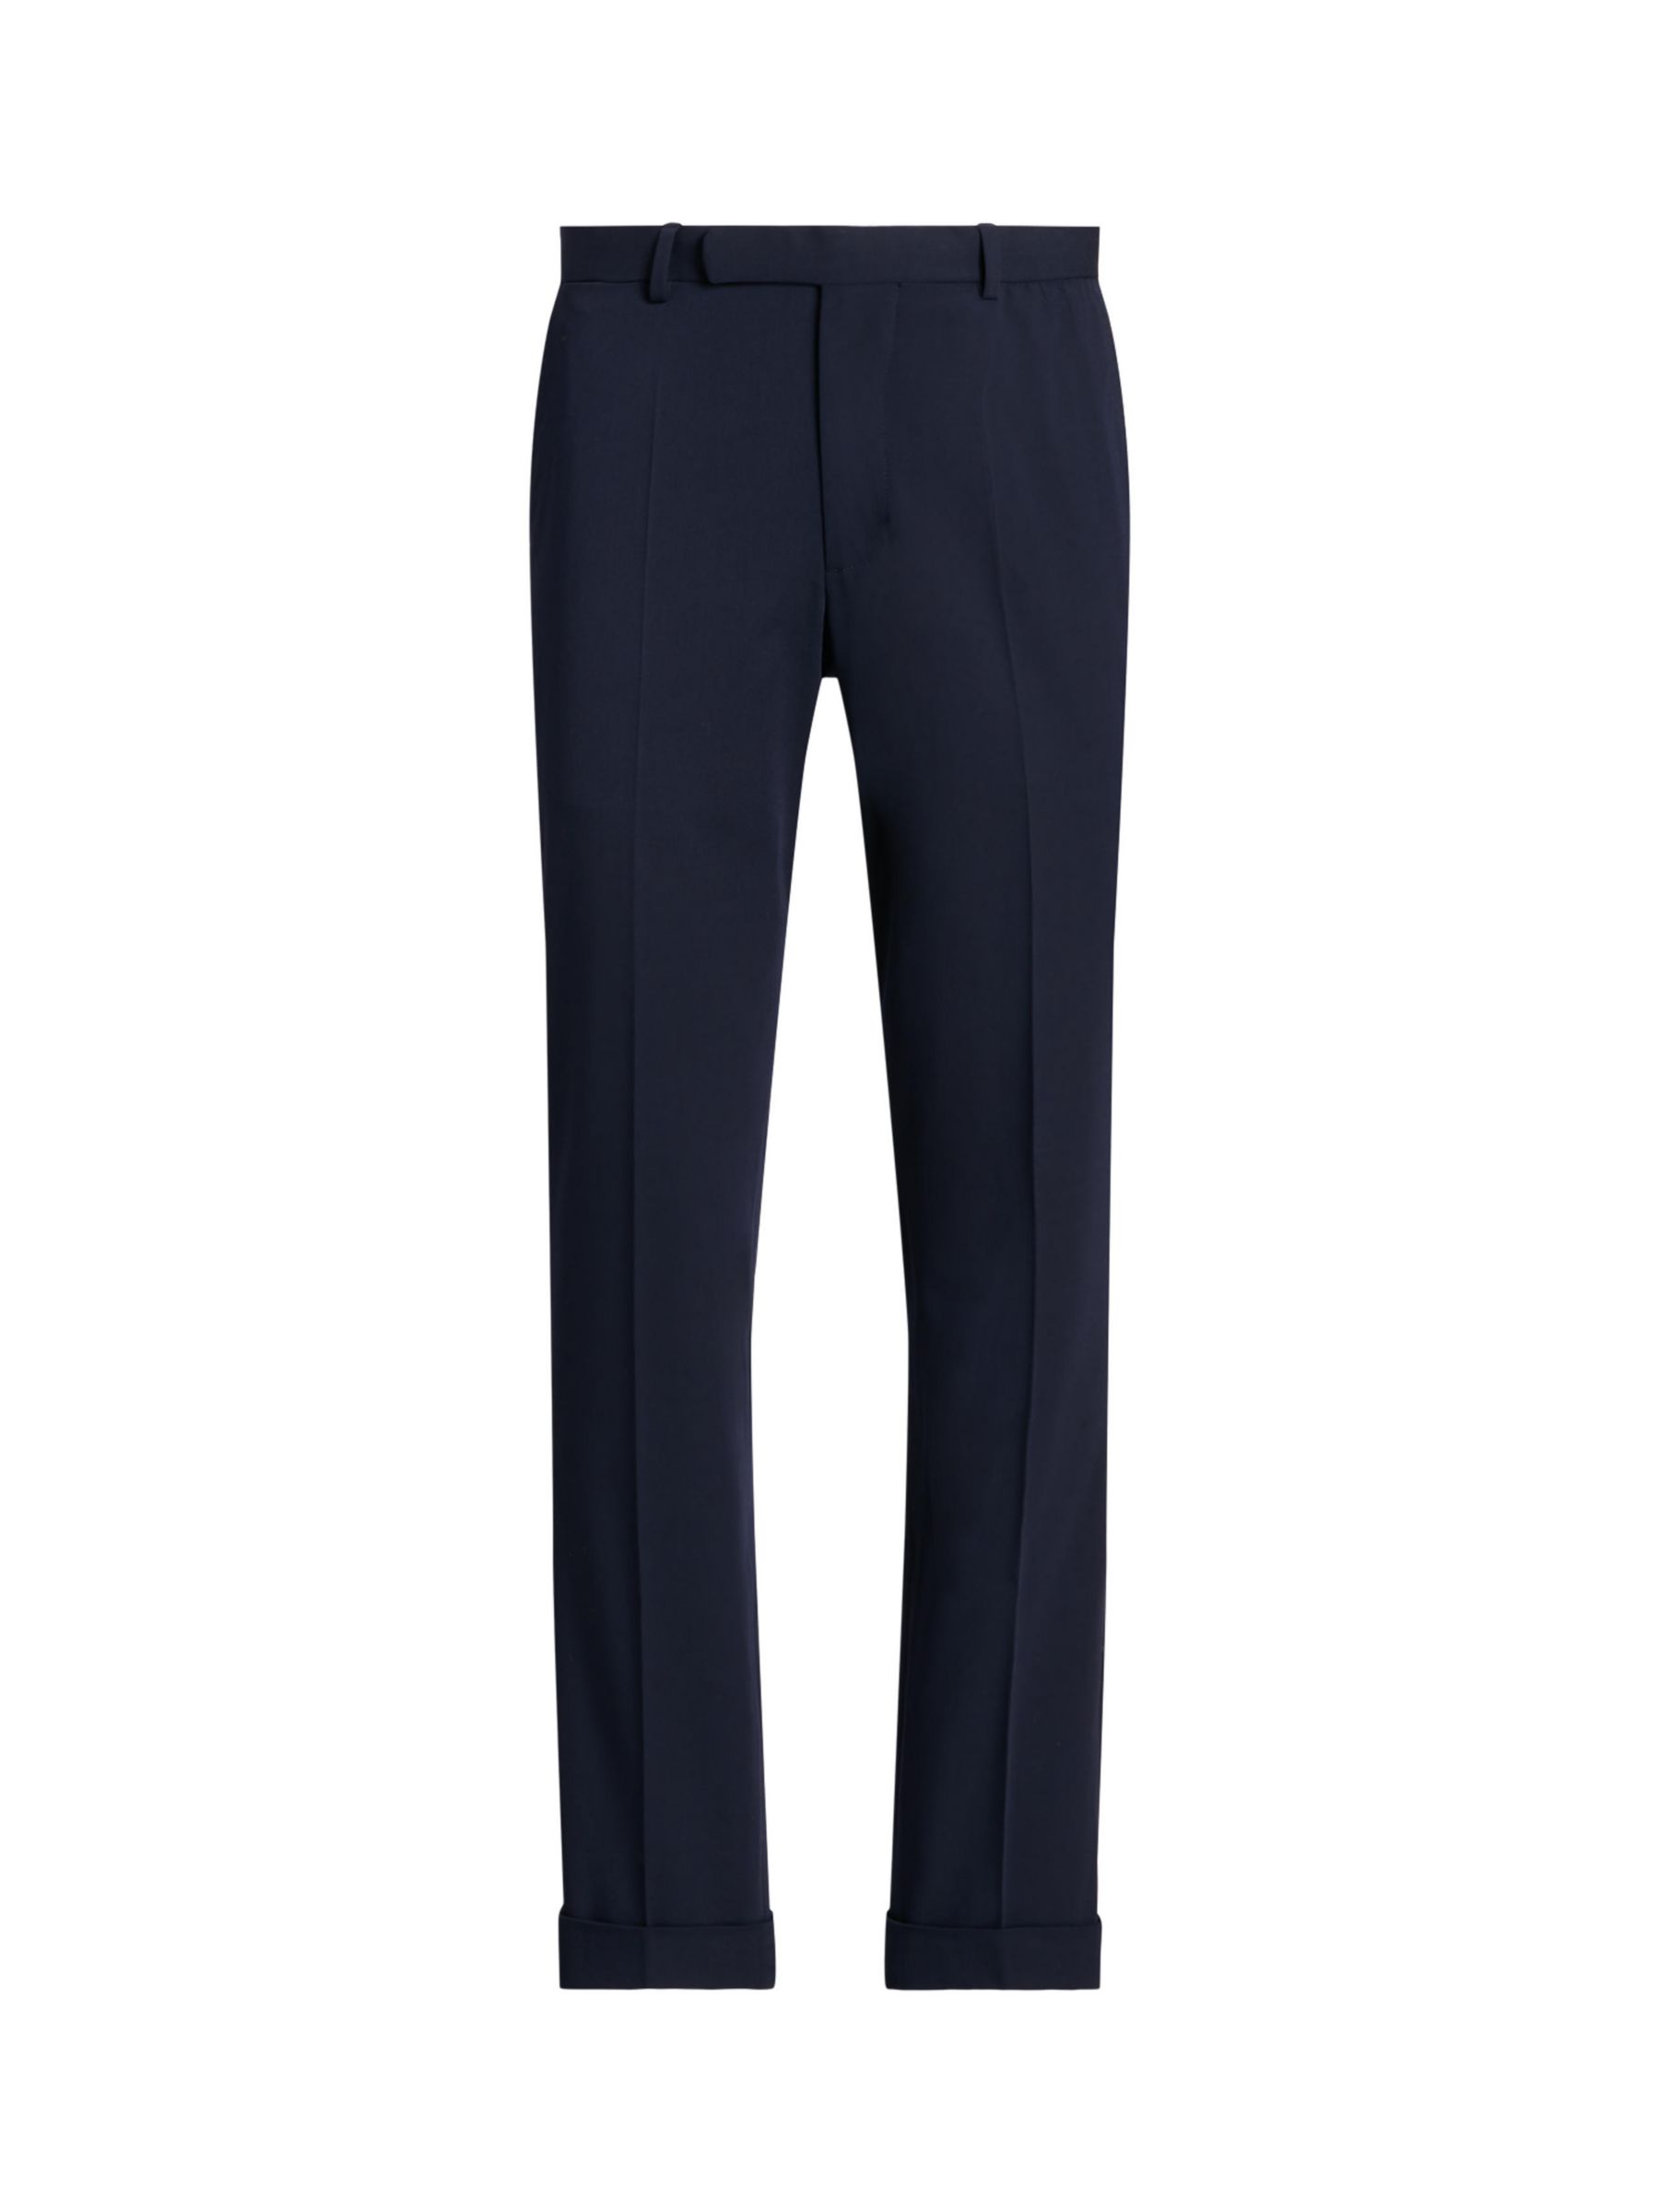 Polo Ralph Lauren Performance Stretch Twill Suit Trouser, Navy at John ...